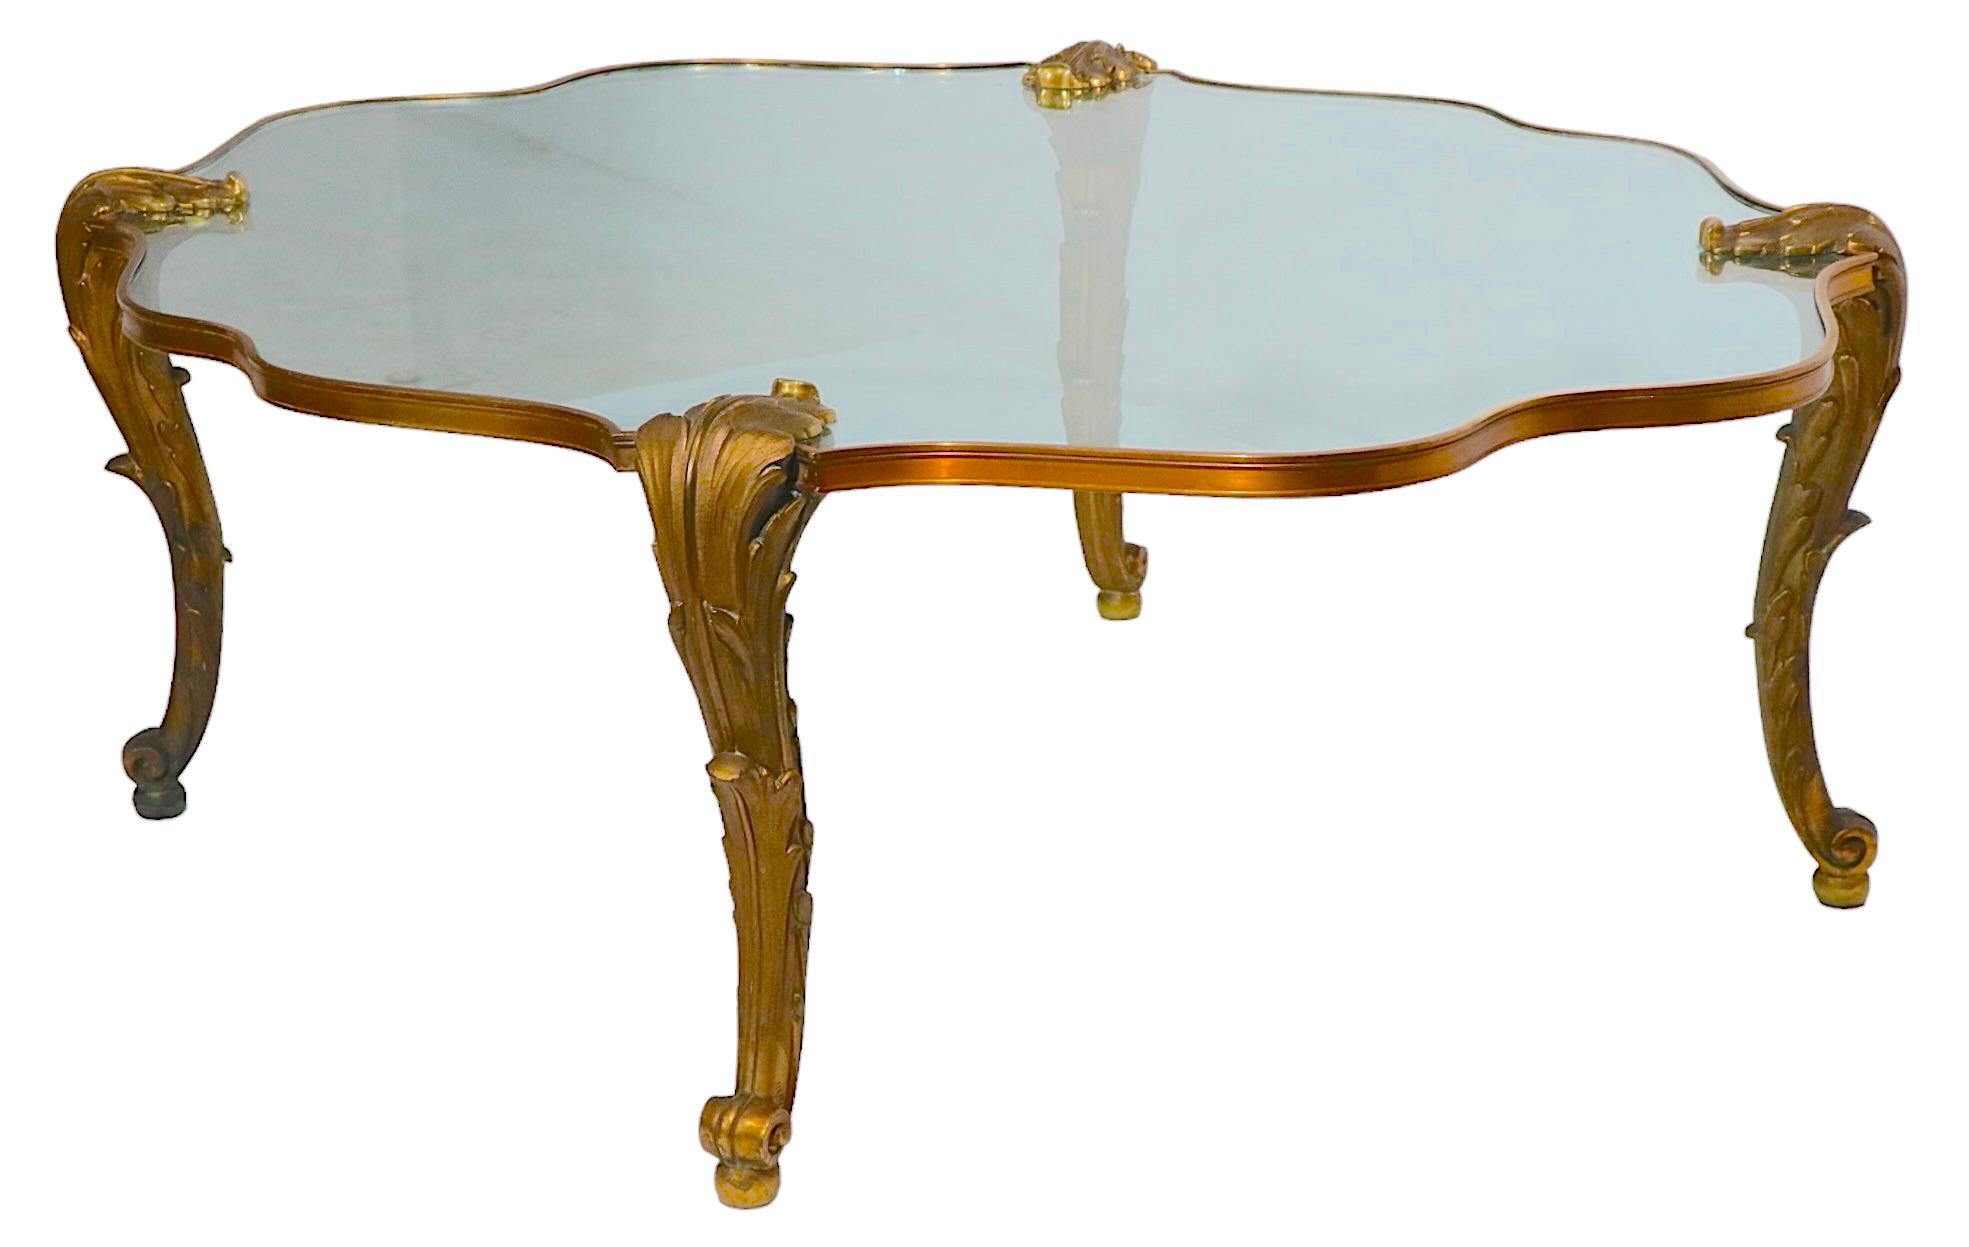 Extraordinary P.E. Guerin brass and glass coffee table having ornate cast brass legs and unusual brass trim. Made in France mid 20th C, this piece exhibits the expected quality of this top end luxury brand. The table is in excellent original